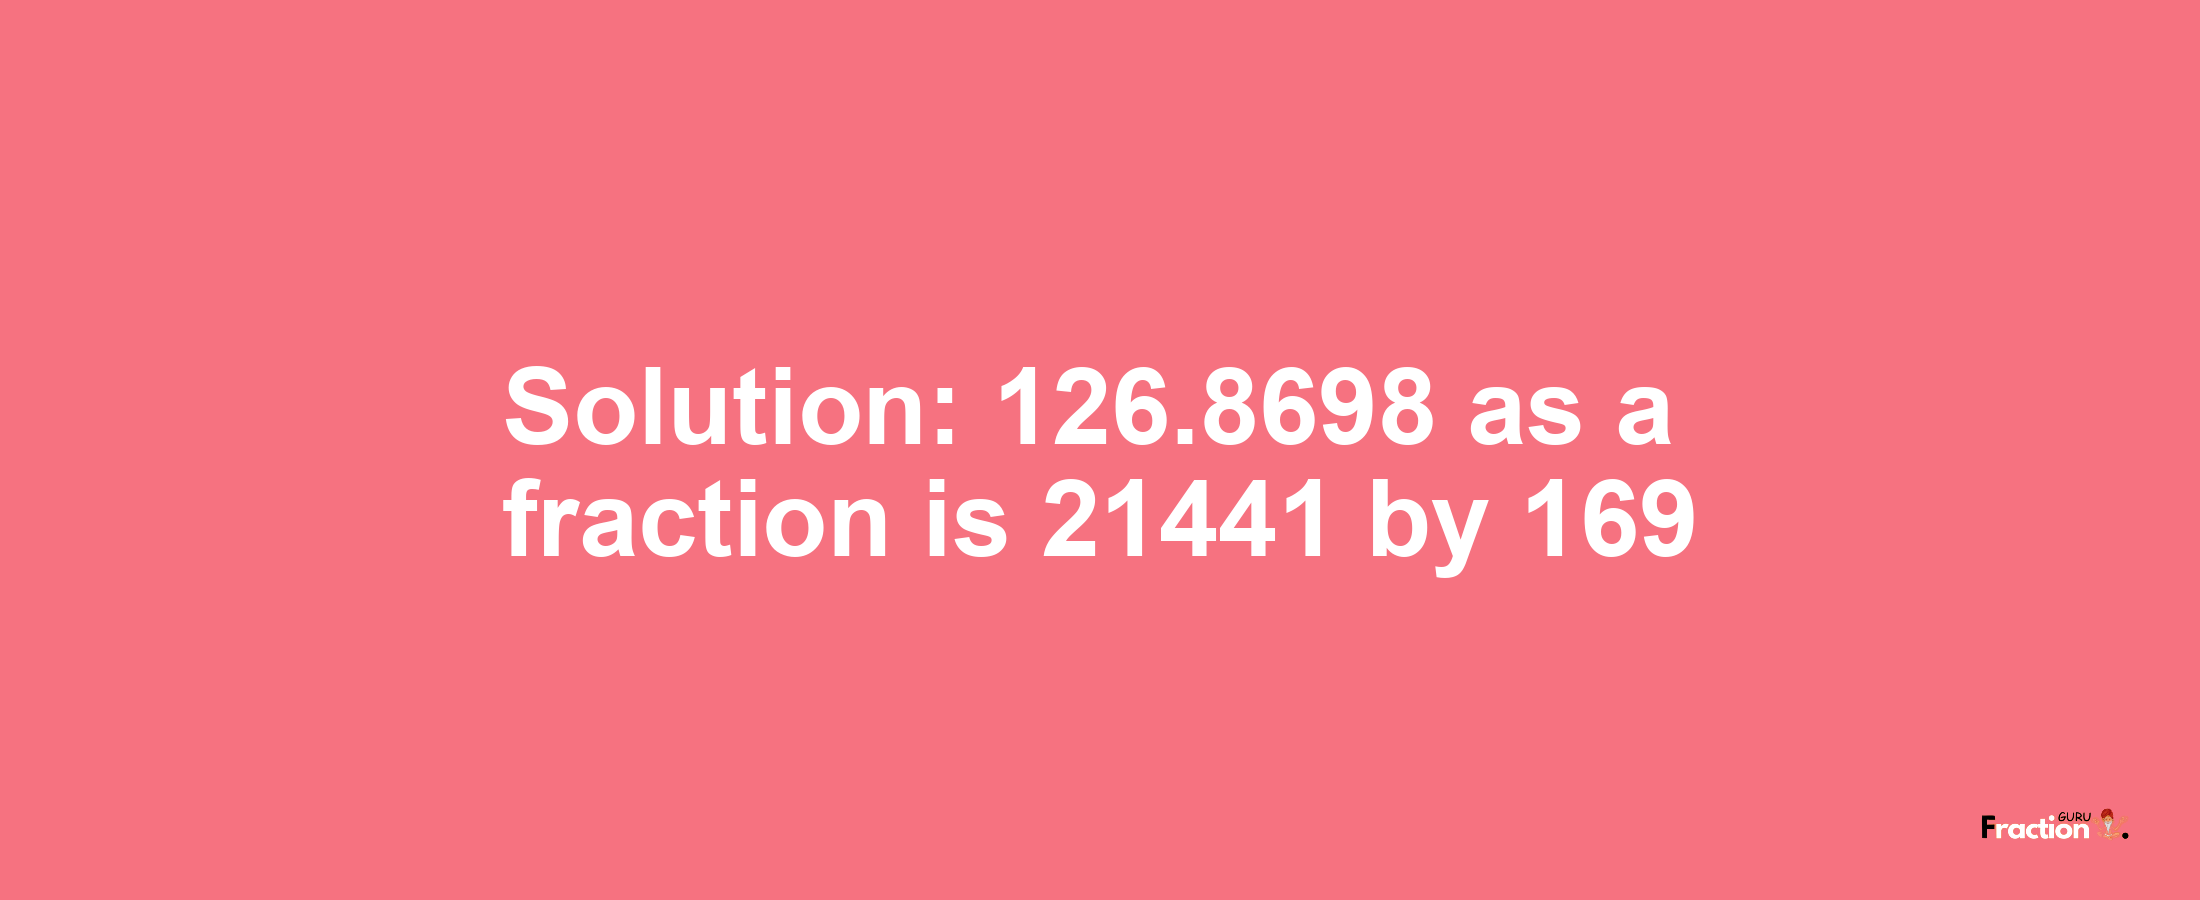 Solution:126.8698 as a fraction is 21441/169